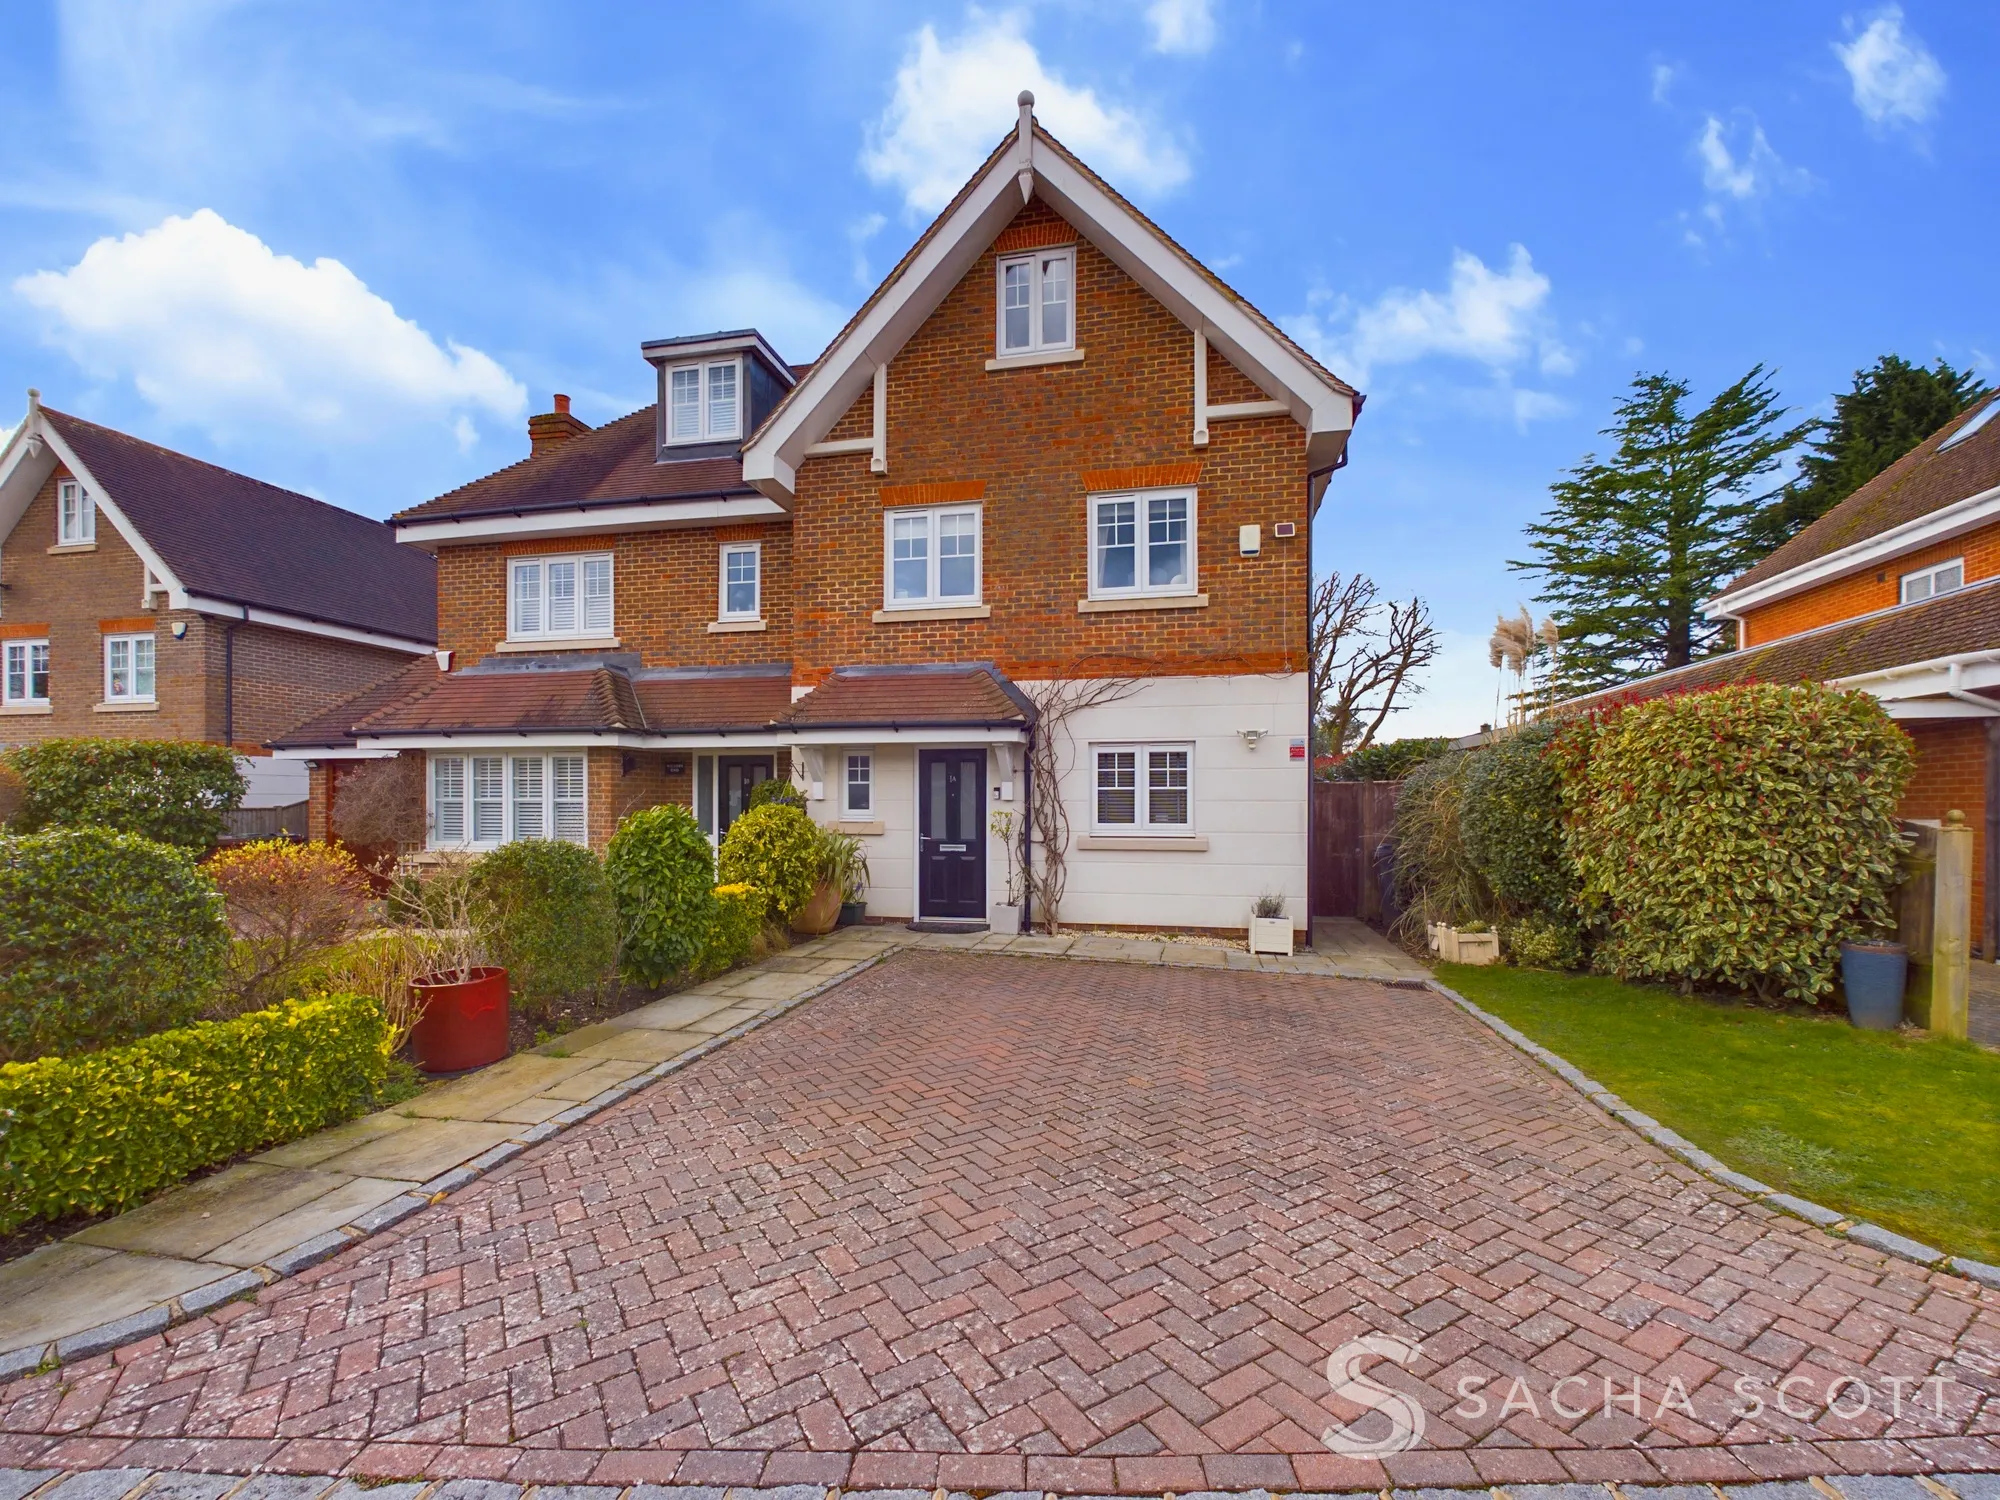 4 bed semi-detached house for sale in Magnolia Drive, Banstead - Property Image 1